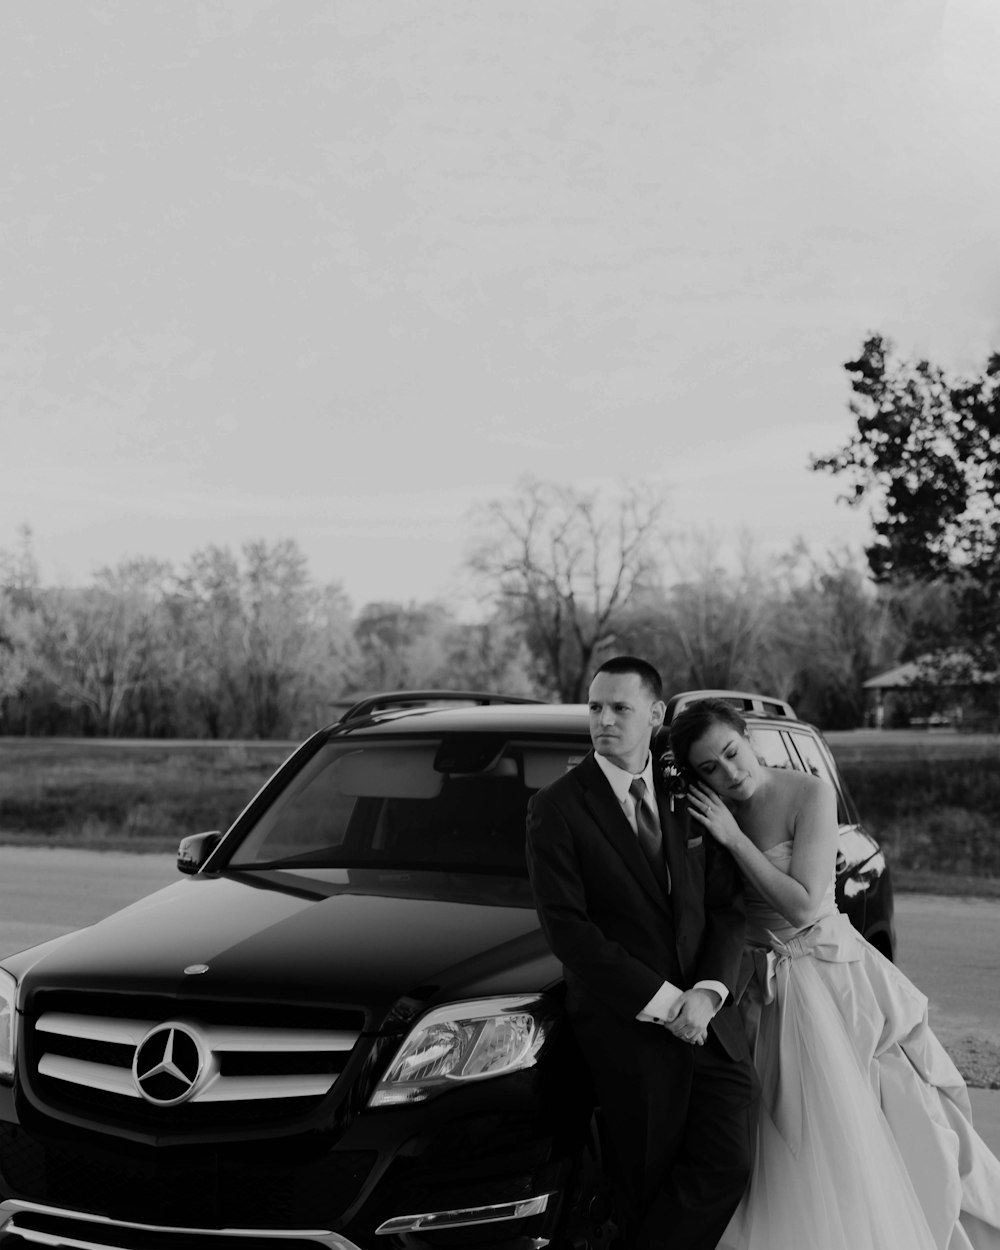 a man and a woman standing next to a car